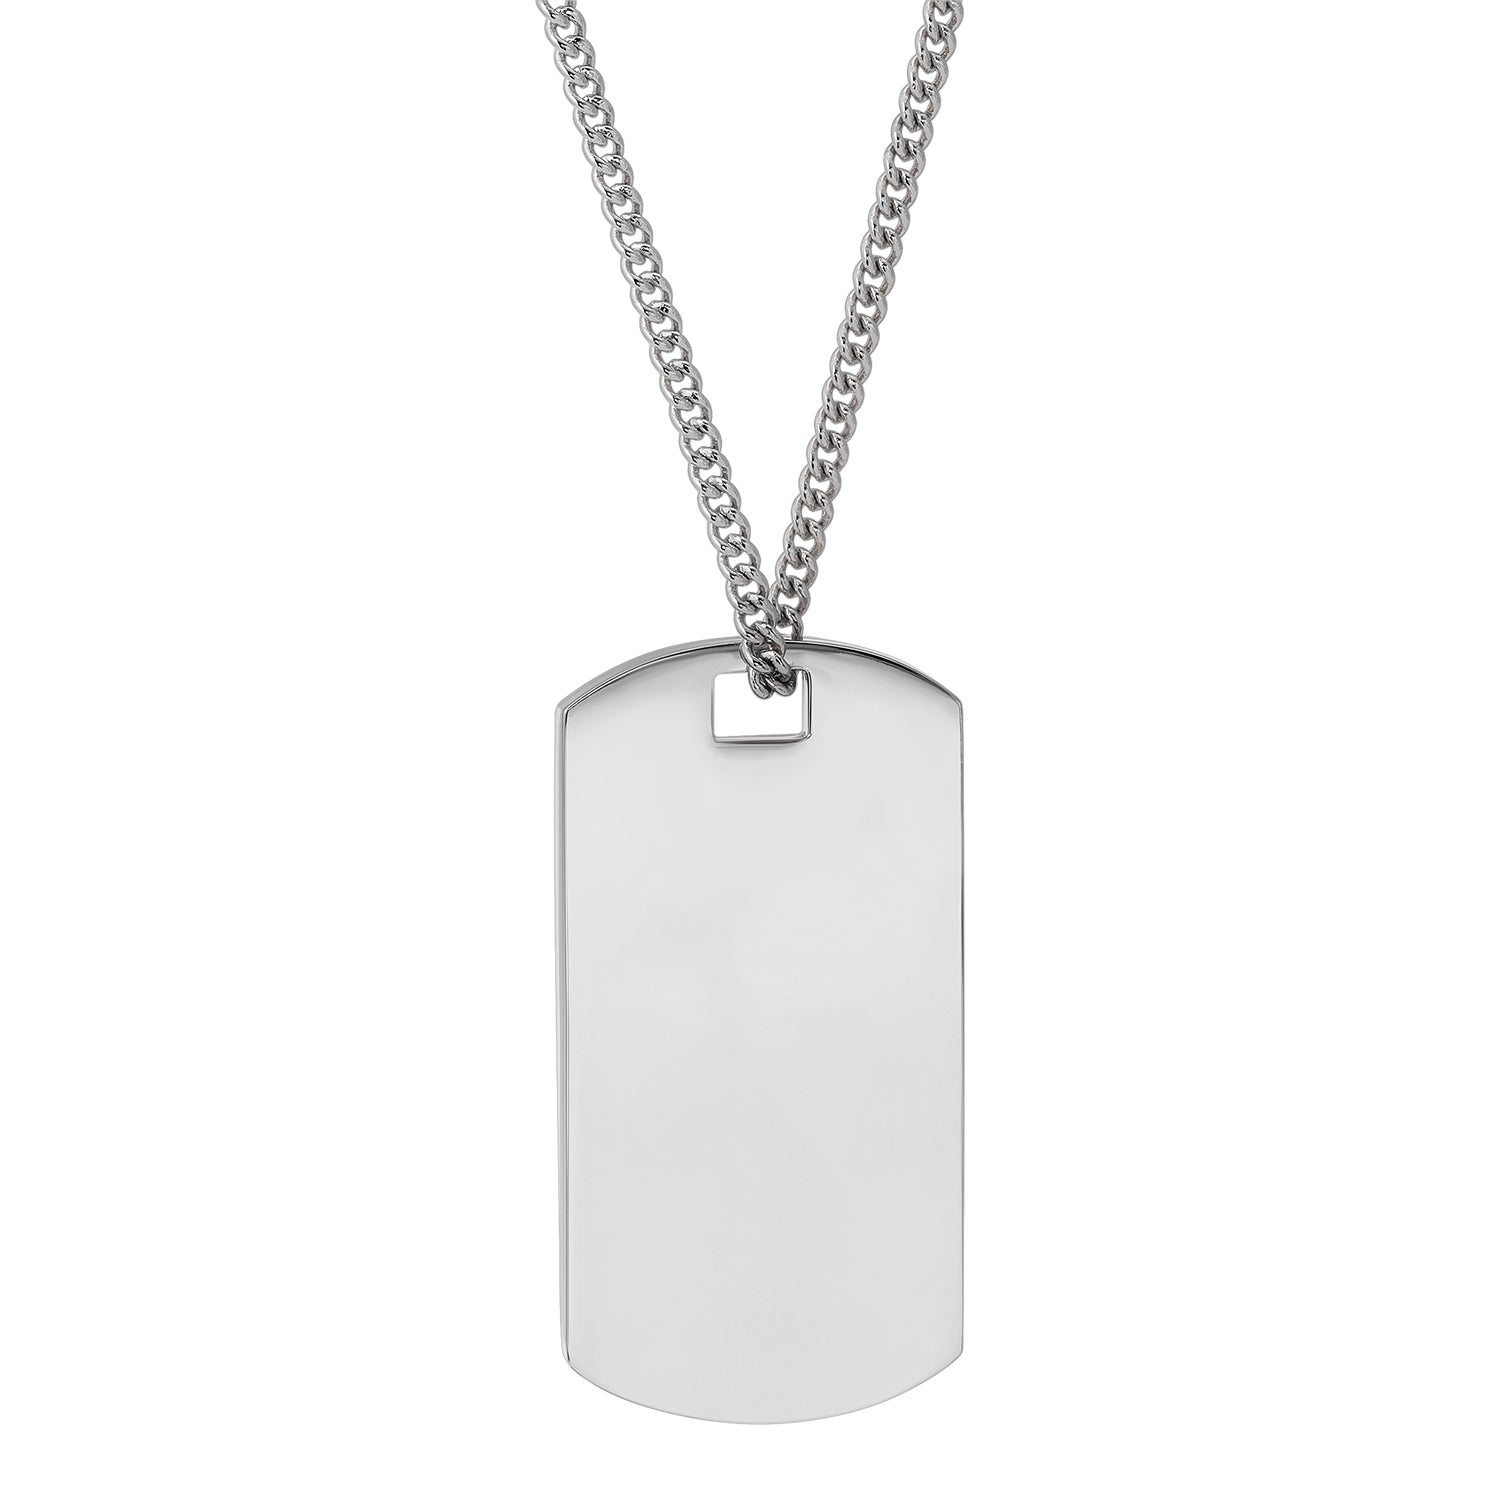 Healifty Polished Stainless Steel Dog Tag Blank Pendant Necklace ID Tags  for Dogs Cats (Gold)